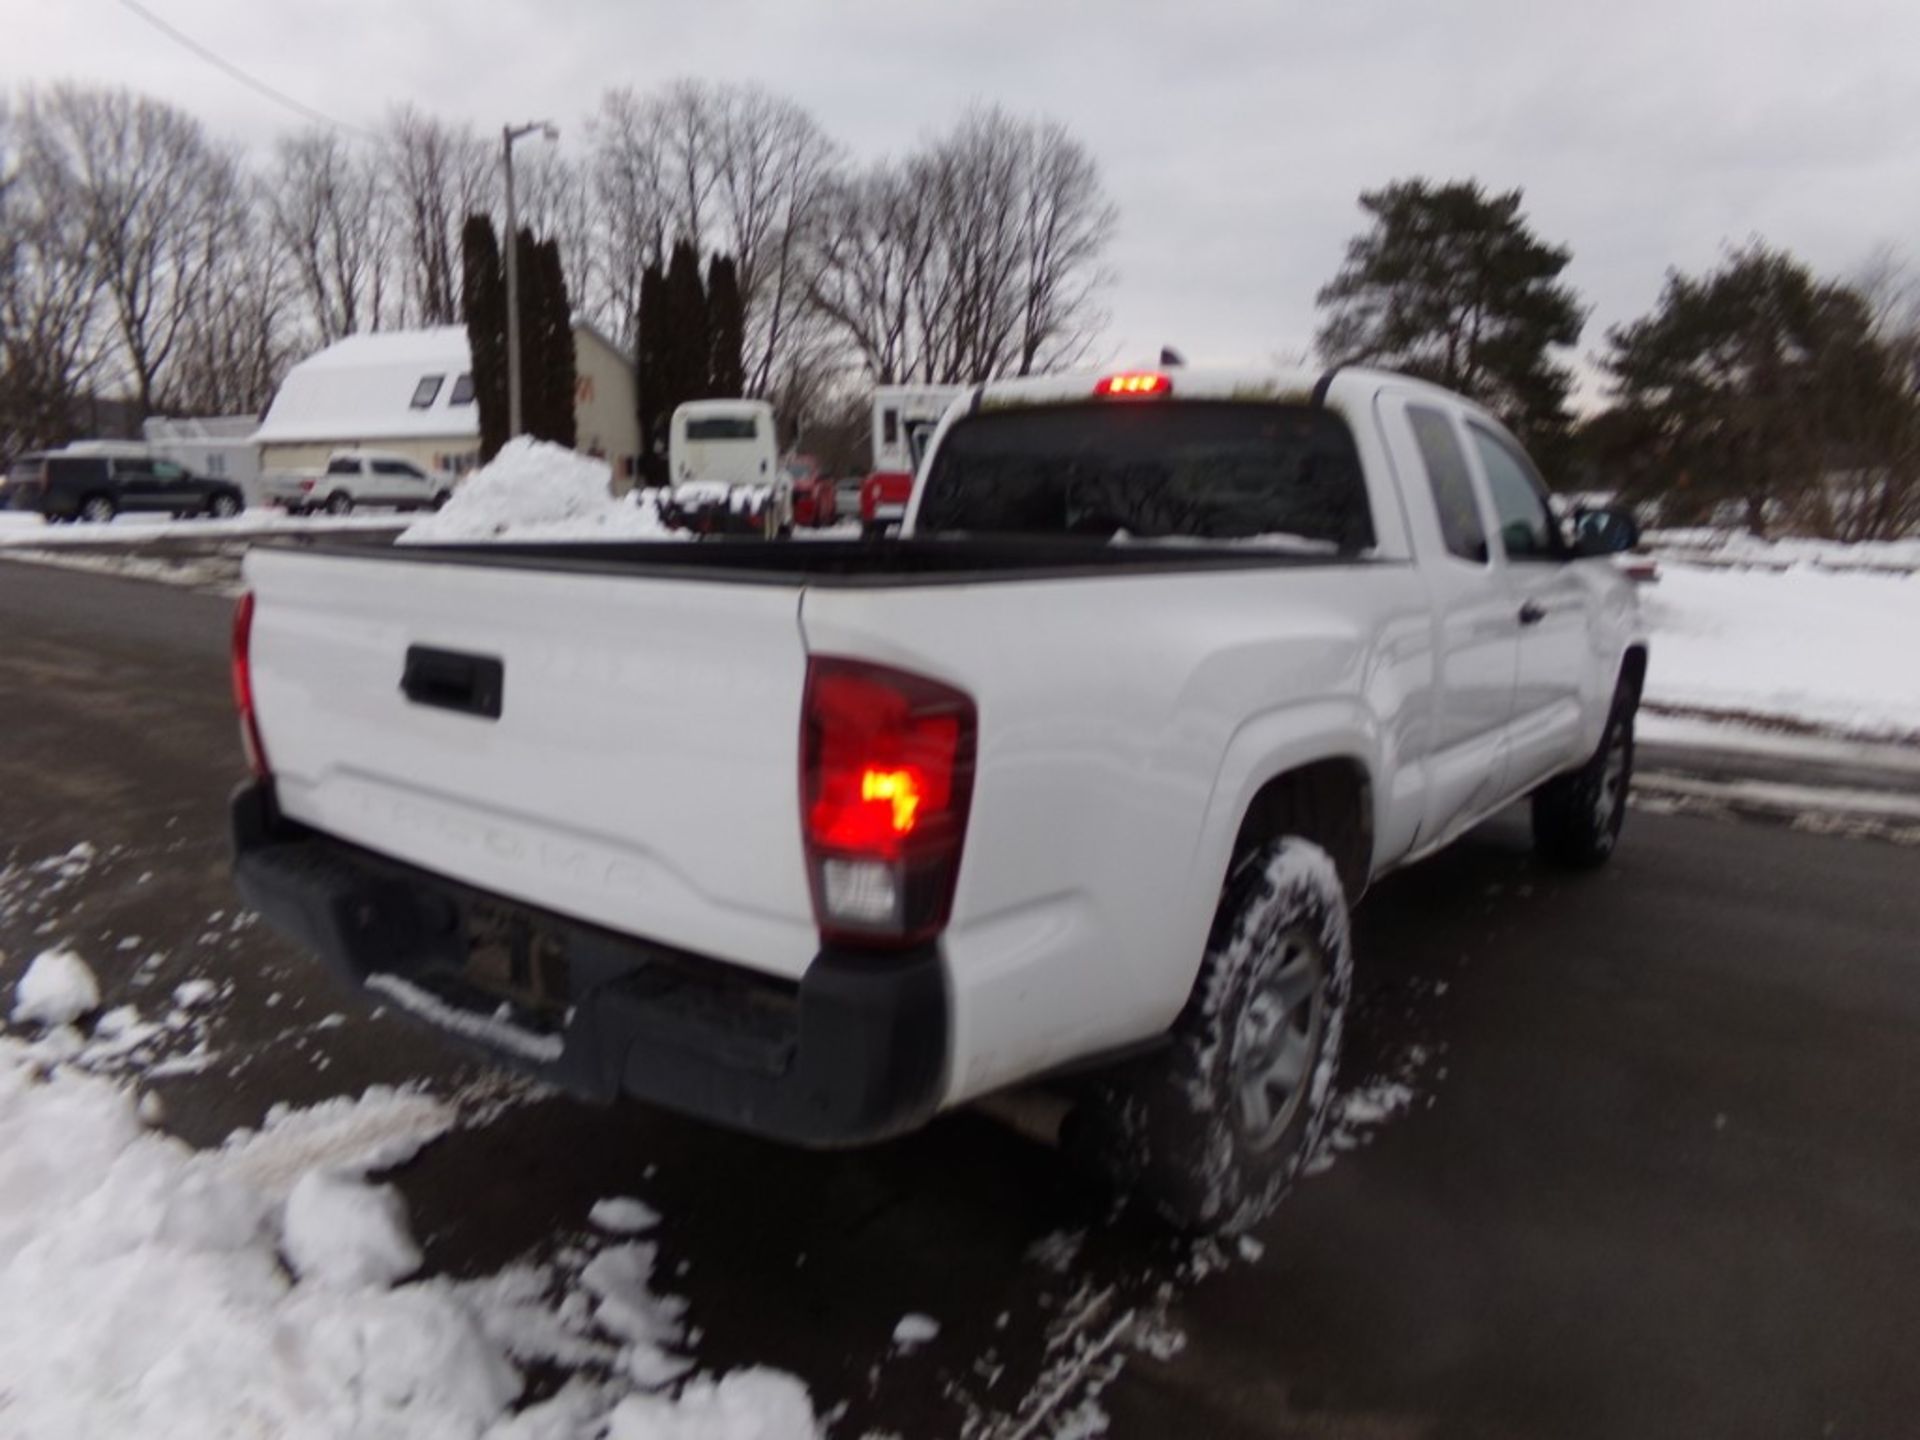 2019 Toyota Tacoma Ext Cab SR, 2wd, White, 122,834 Miles, VIN#5TFRX5GN8KX147601, GAS TANK DOOR IS - Image 3 of 7